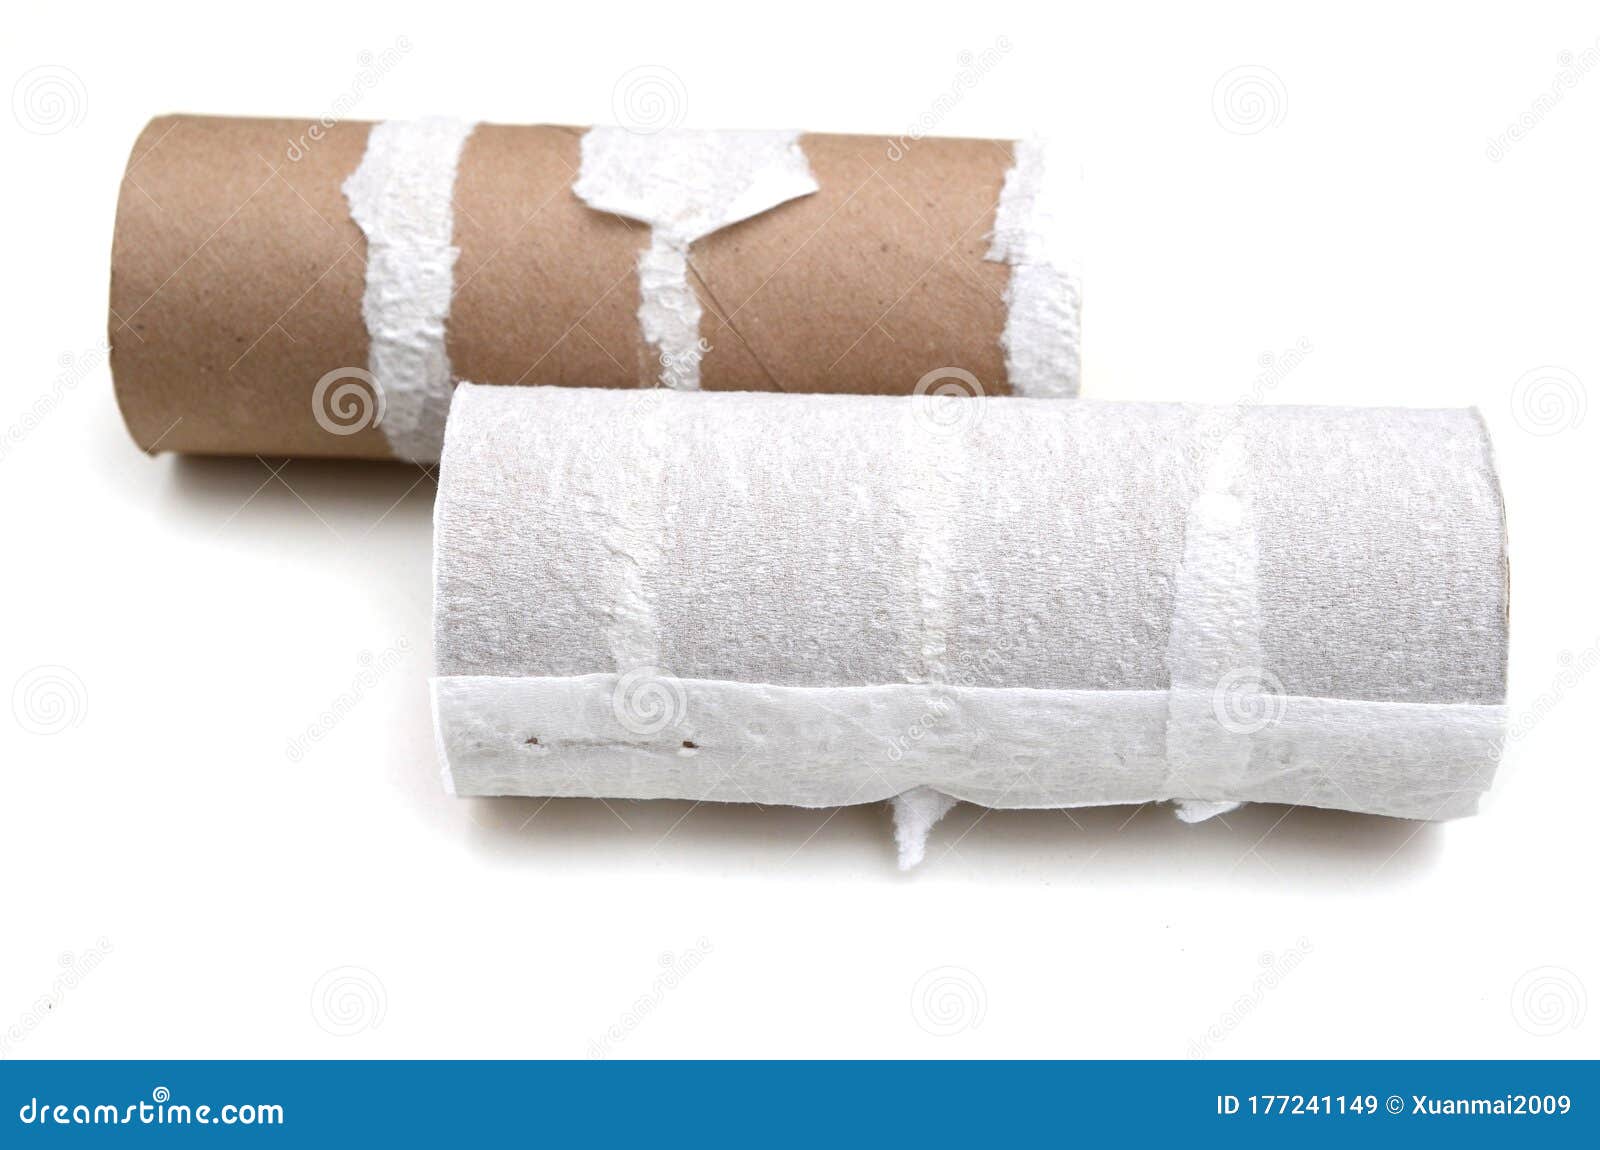 two emptiness toilet paper rolls